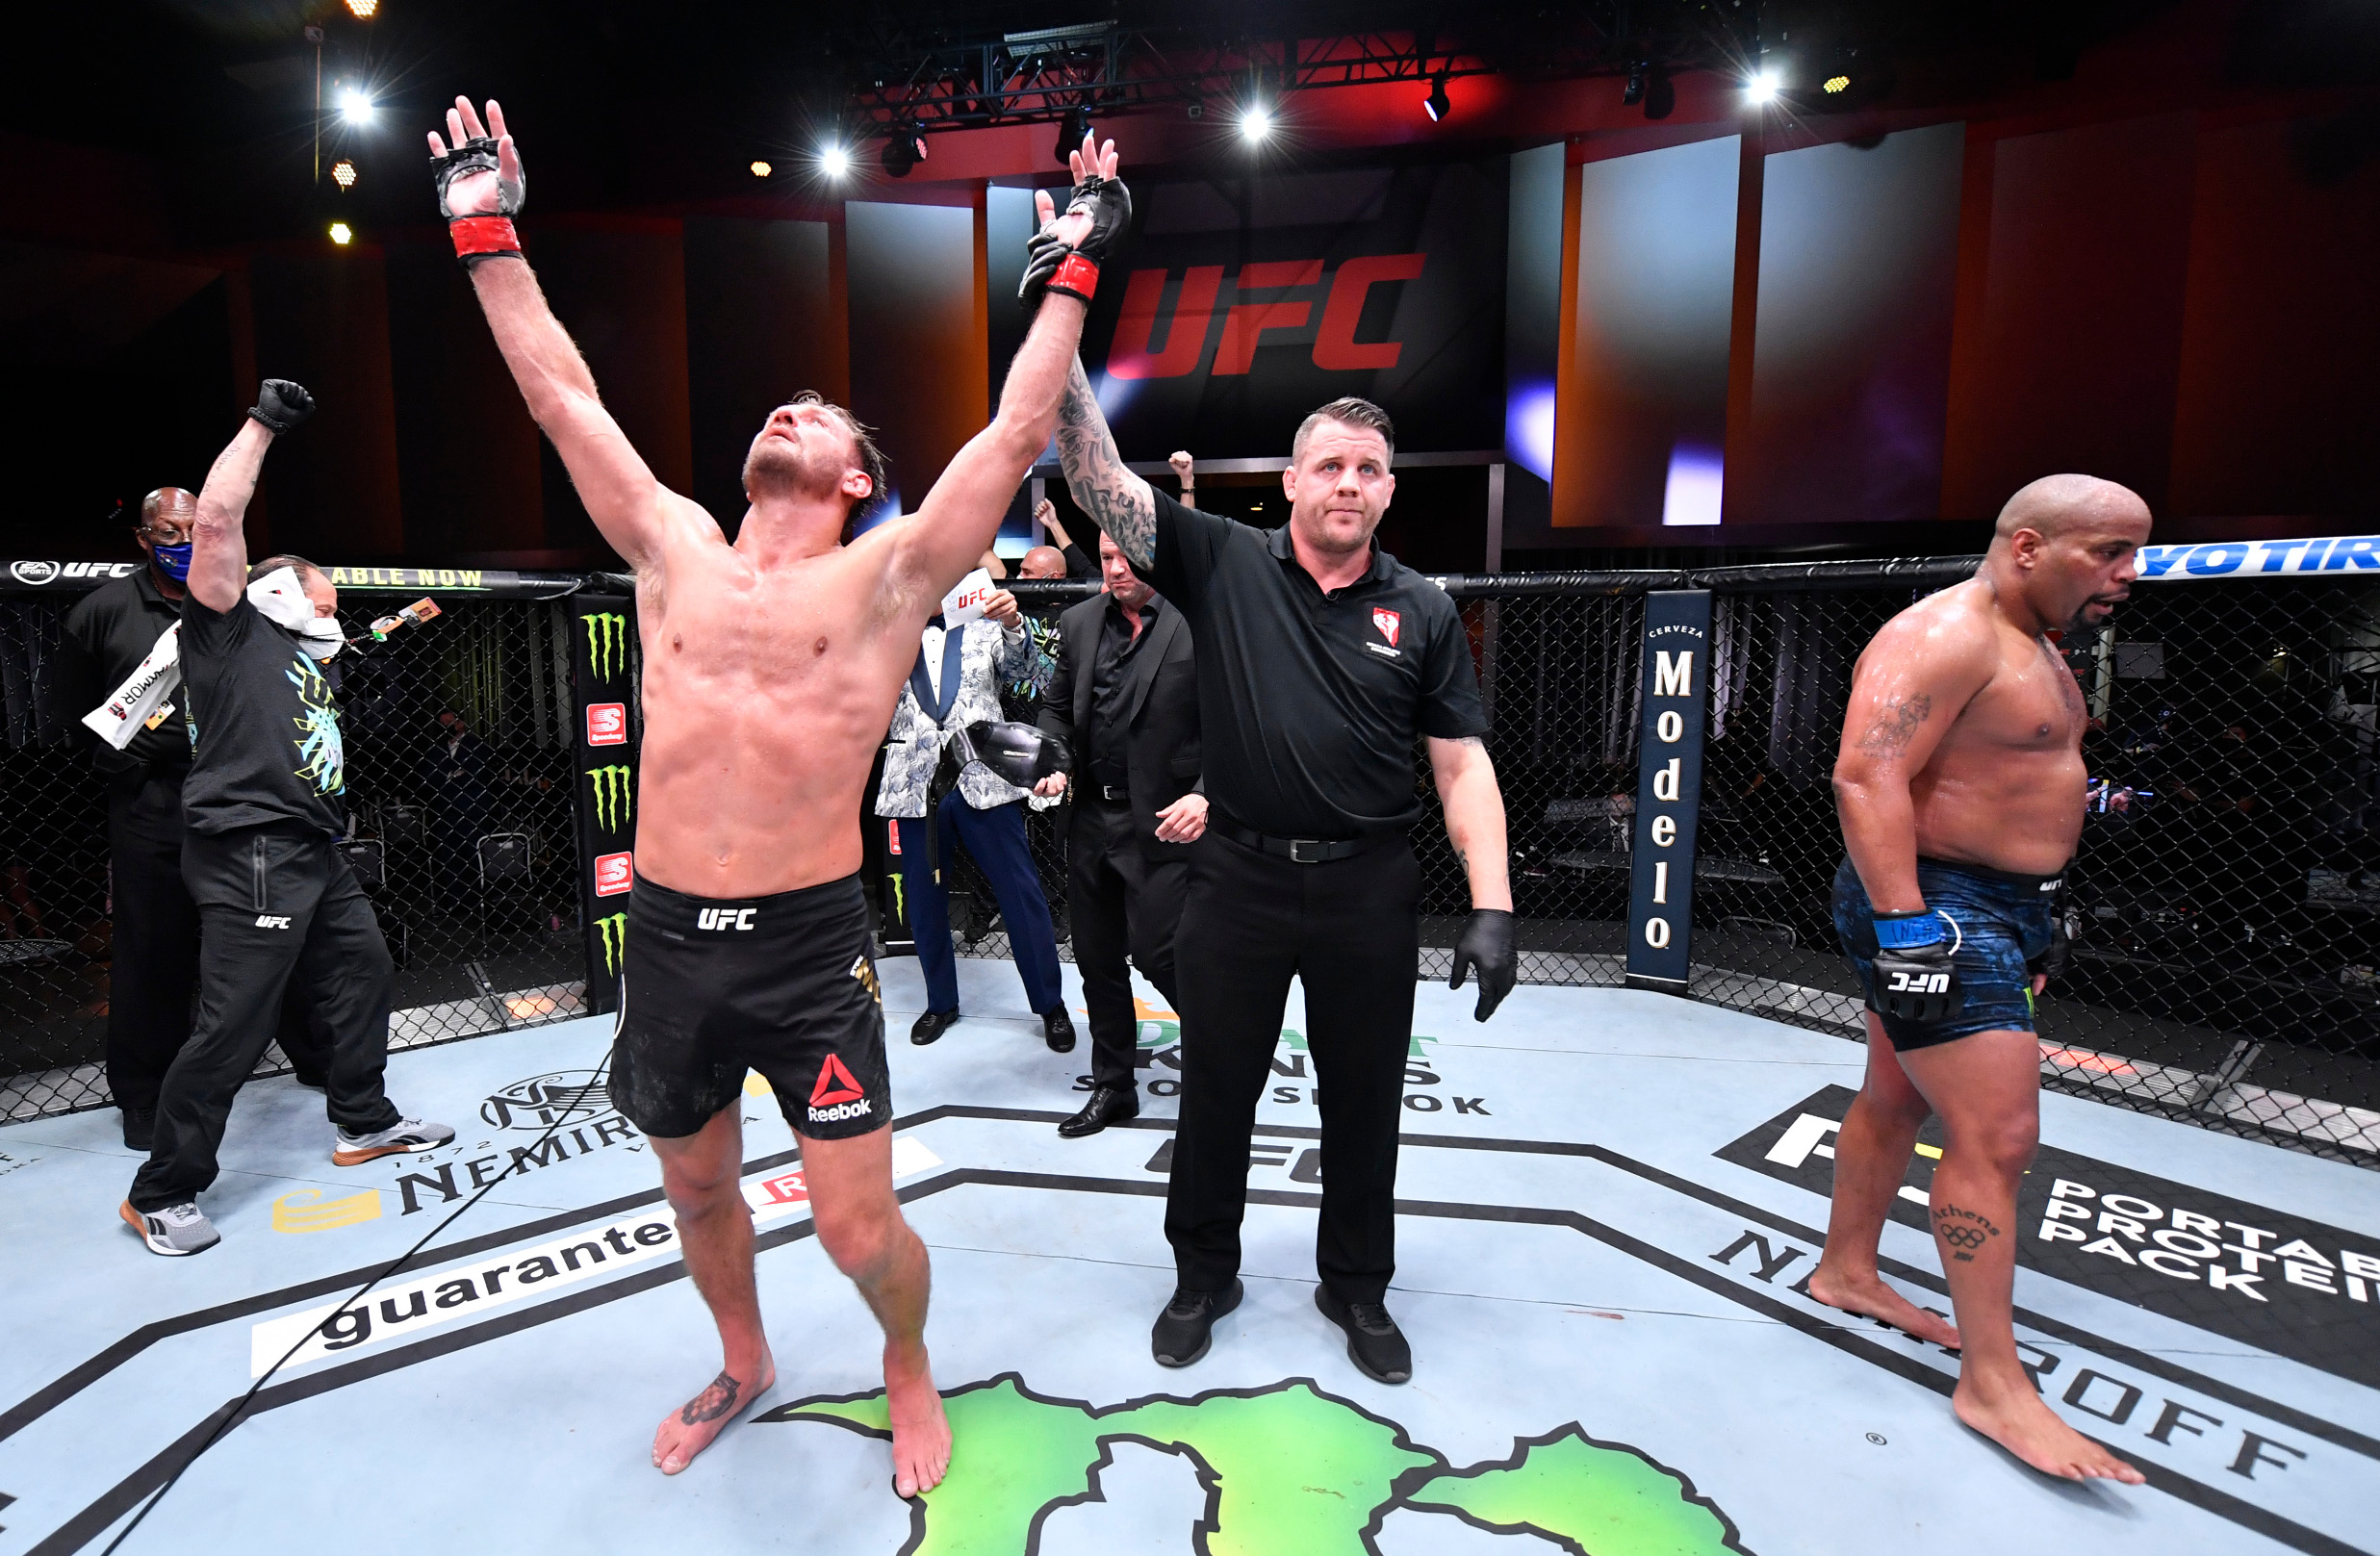 LAS VEGAS, NEVADA - AUGUST 15: In this handout image provided by UFC, Stipe Miocic celebrates after his victory over Daniel Cormier in their UFC heavyweight championship bout during the UFC 252 event at UFC APEX on August 15, 2020 in Las Vegas, Nevada. (Photo by Jeff Bottari/Zuffa LLC via Getty Images)